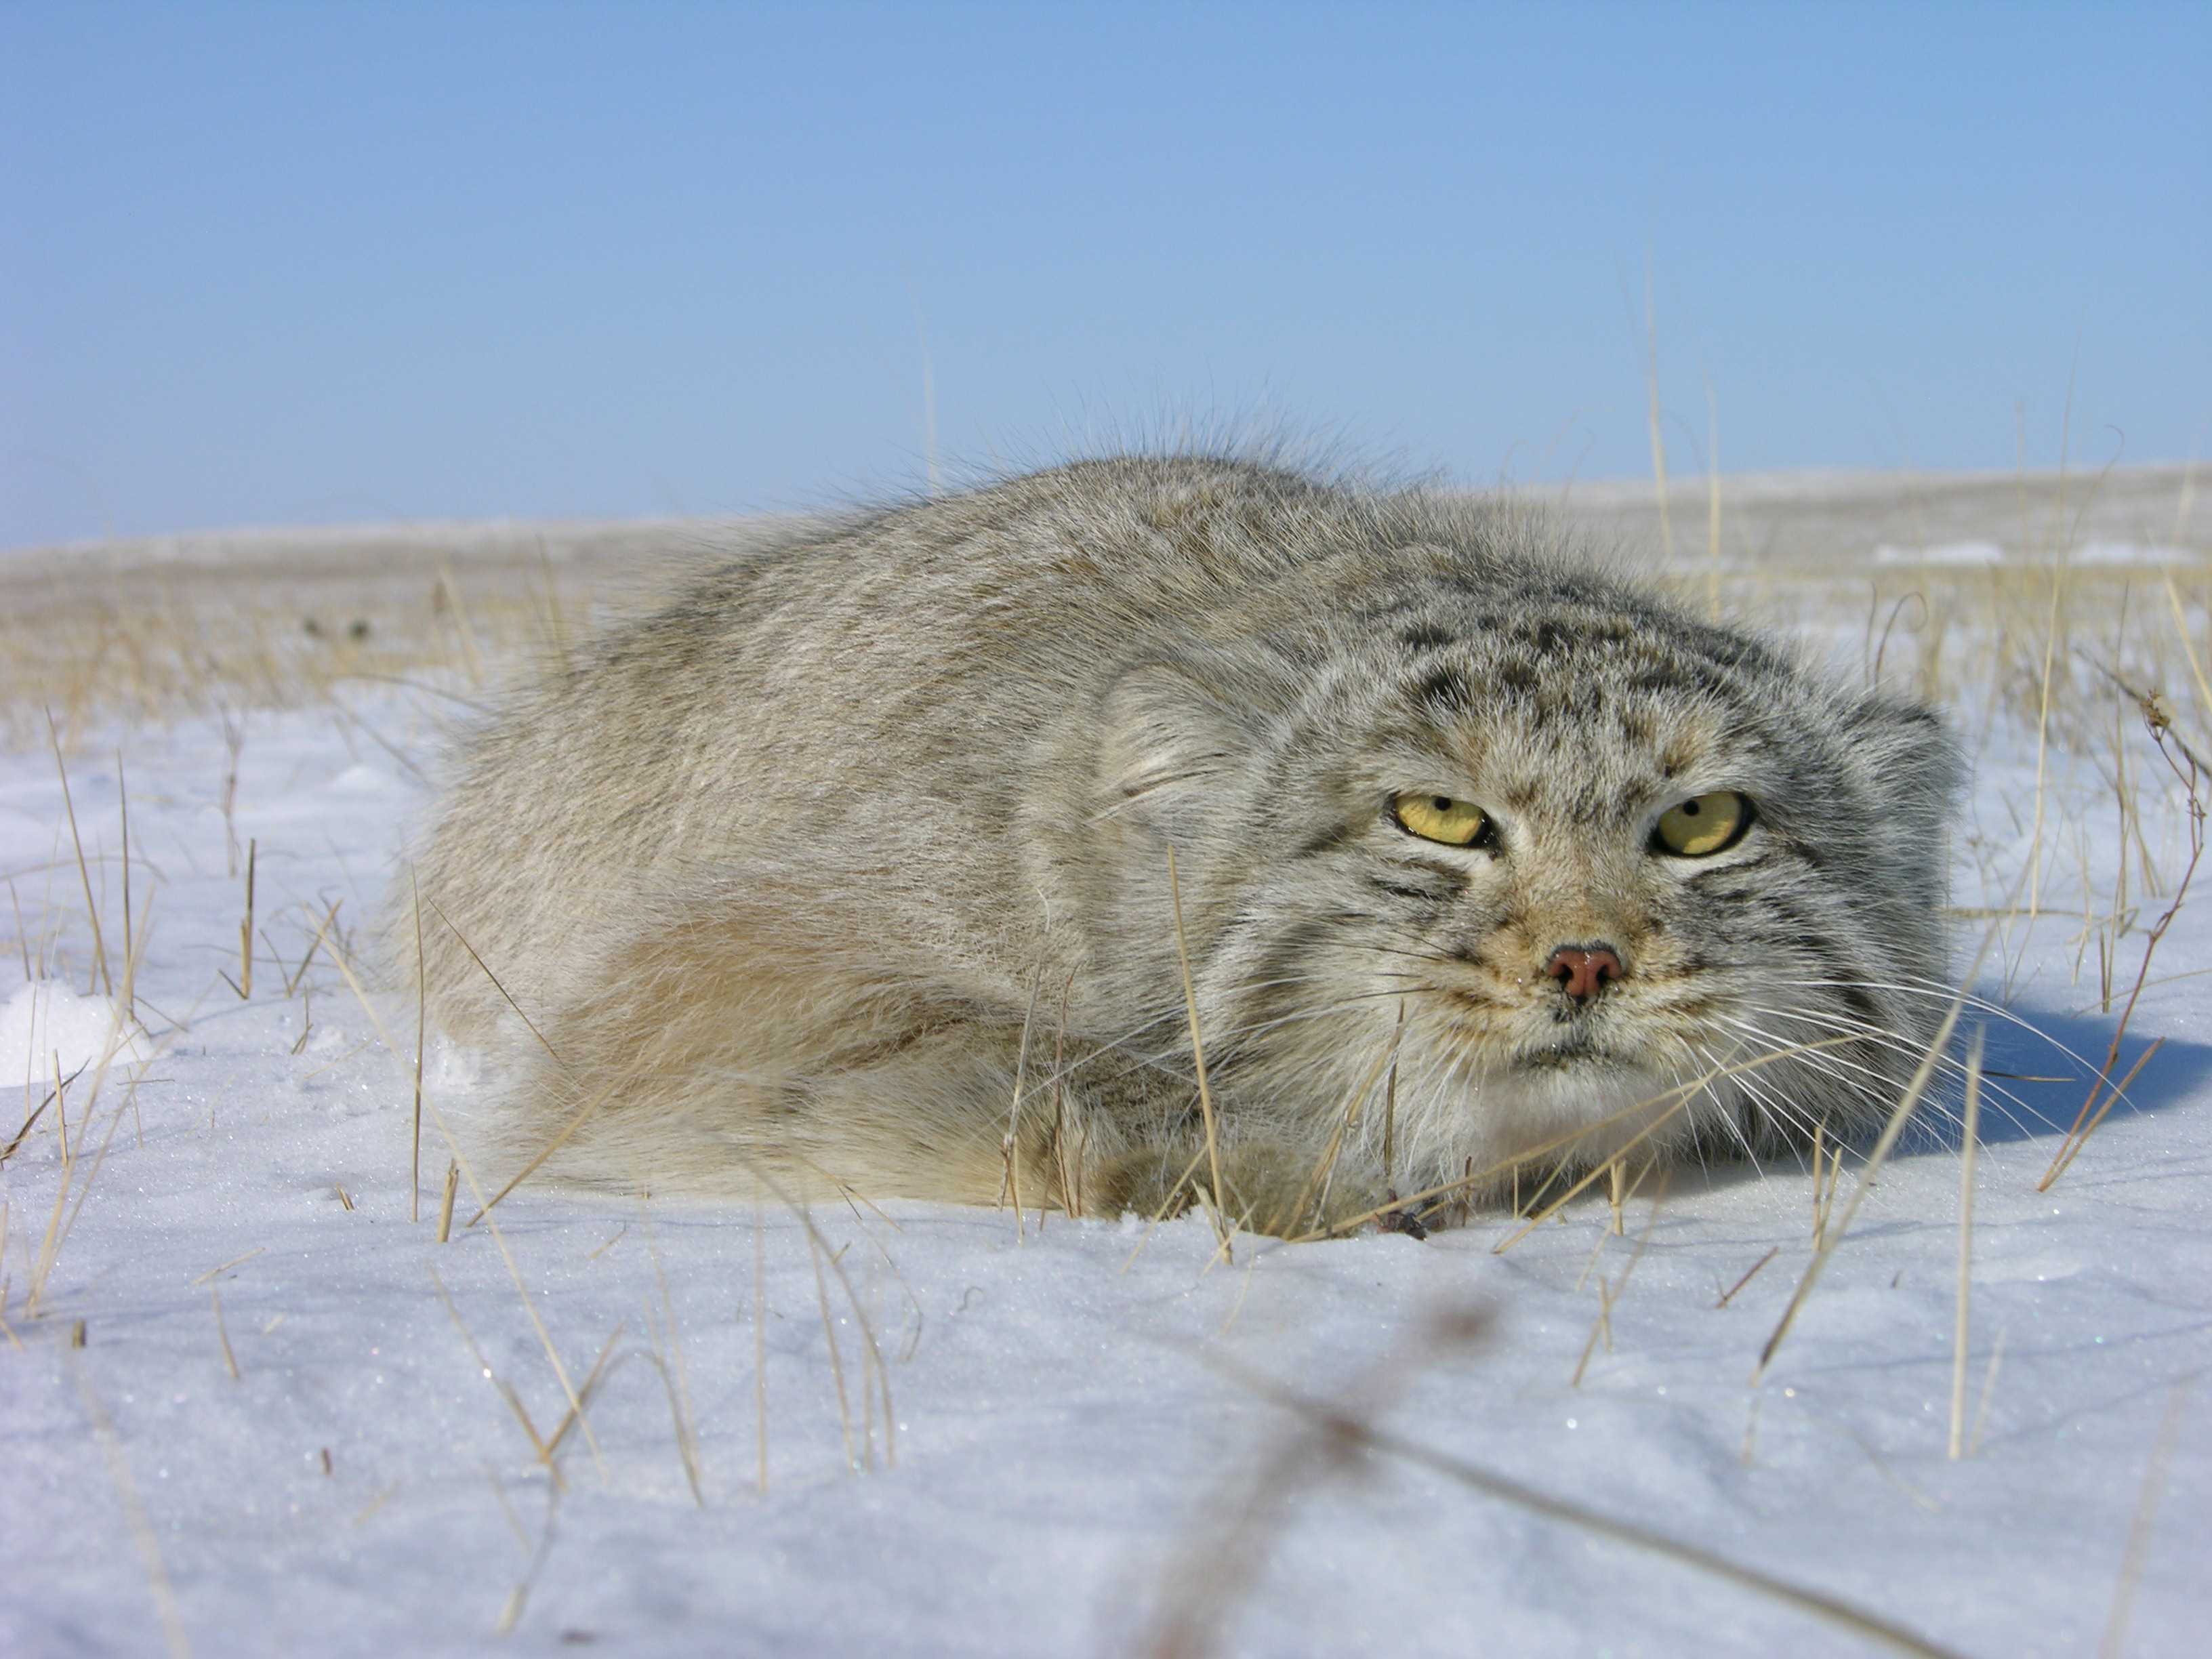 Manul Wild Cat. Photo by unknown.